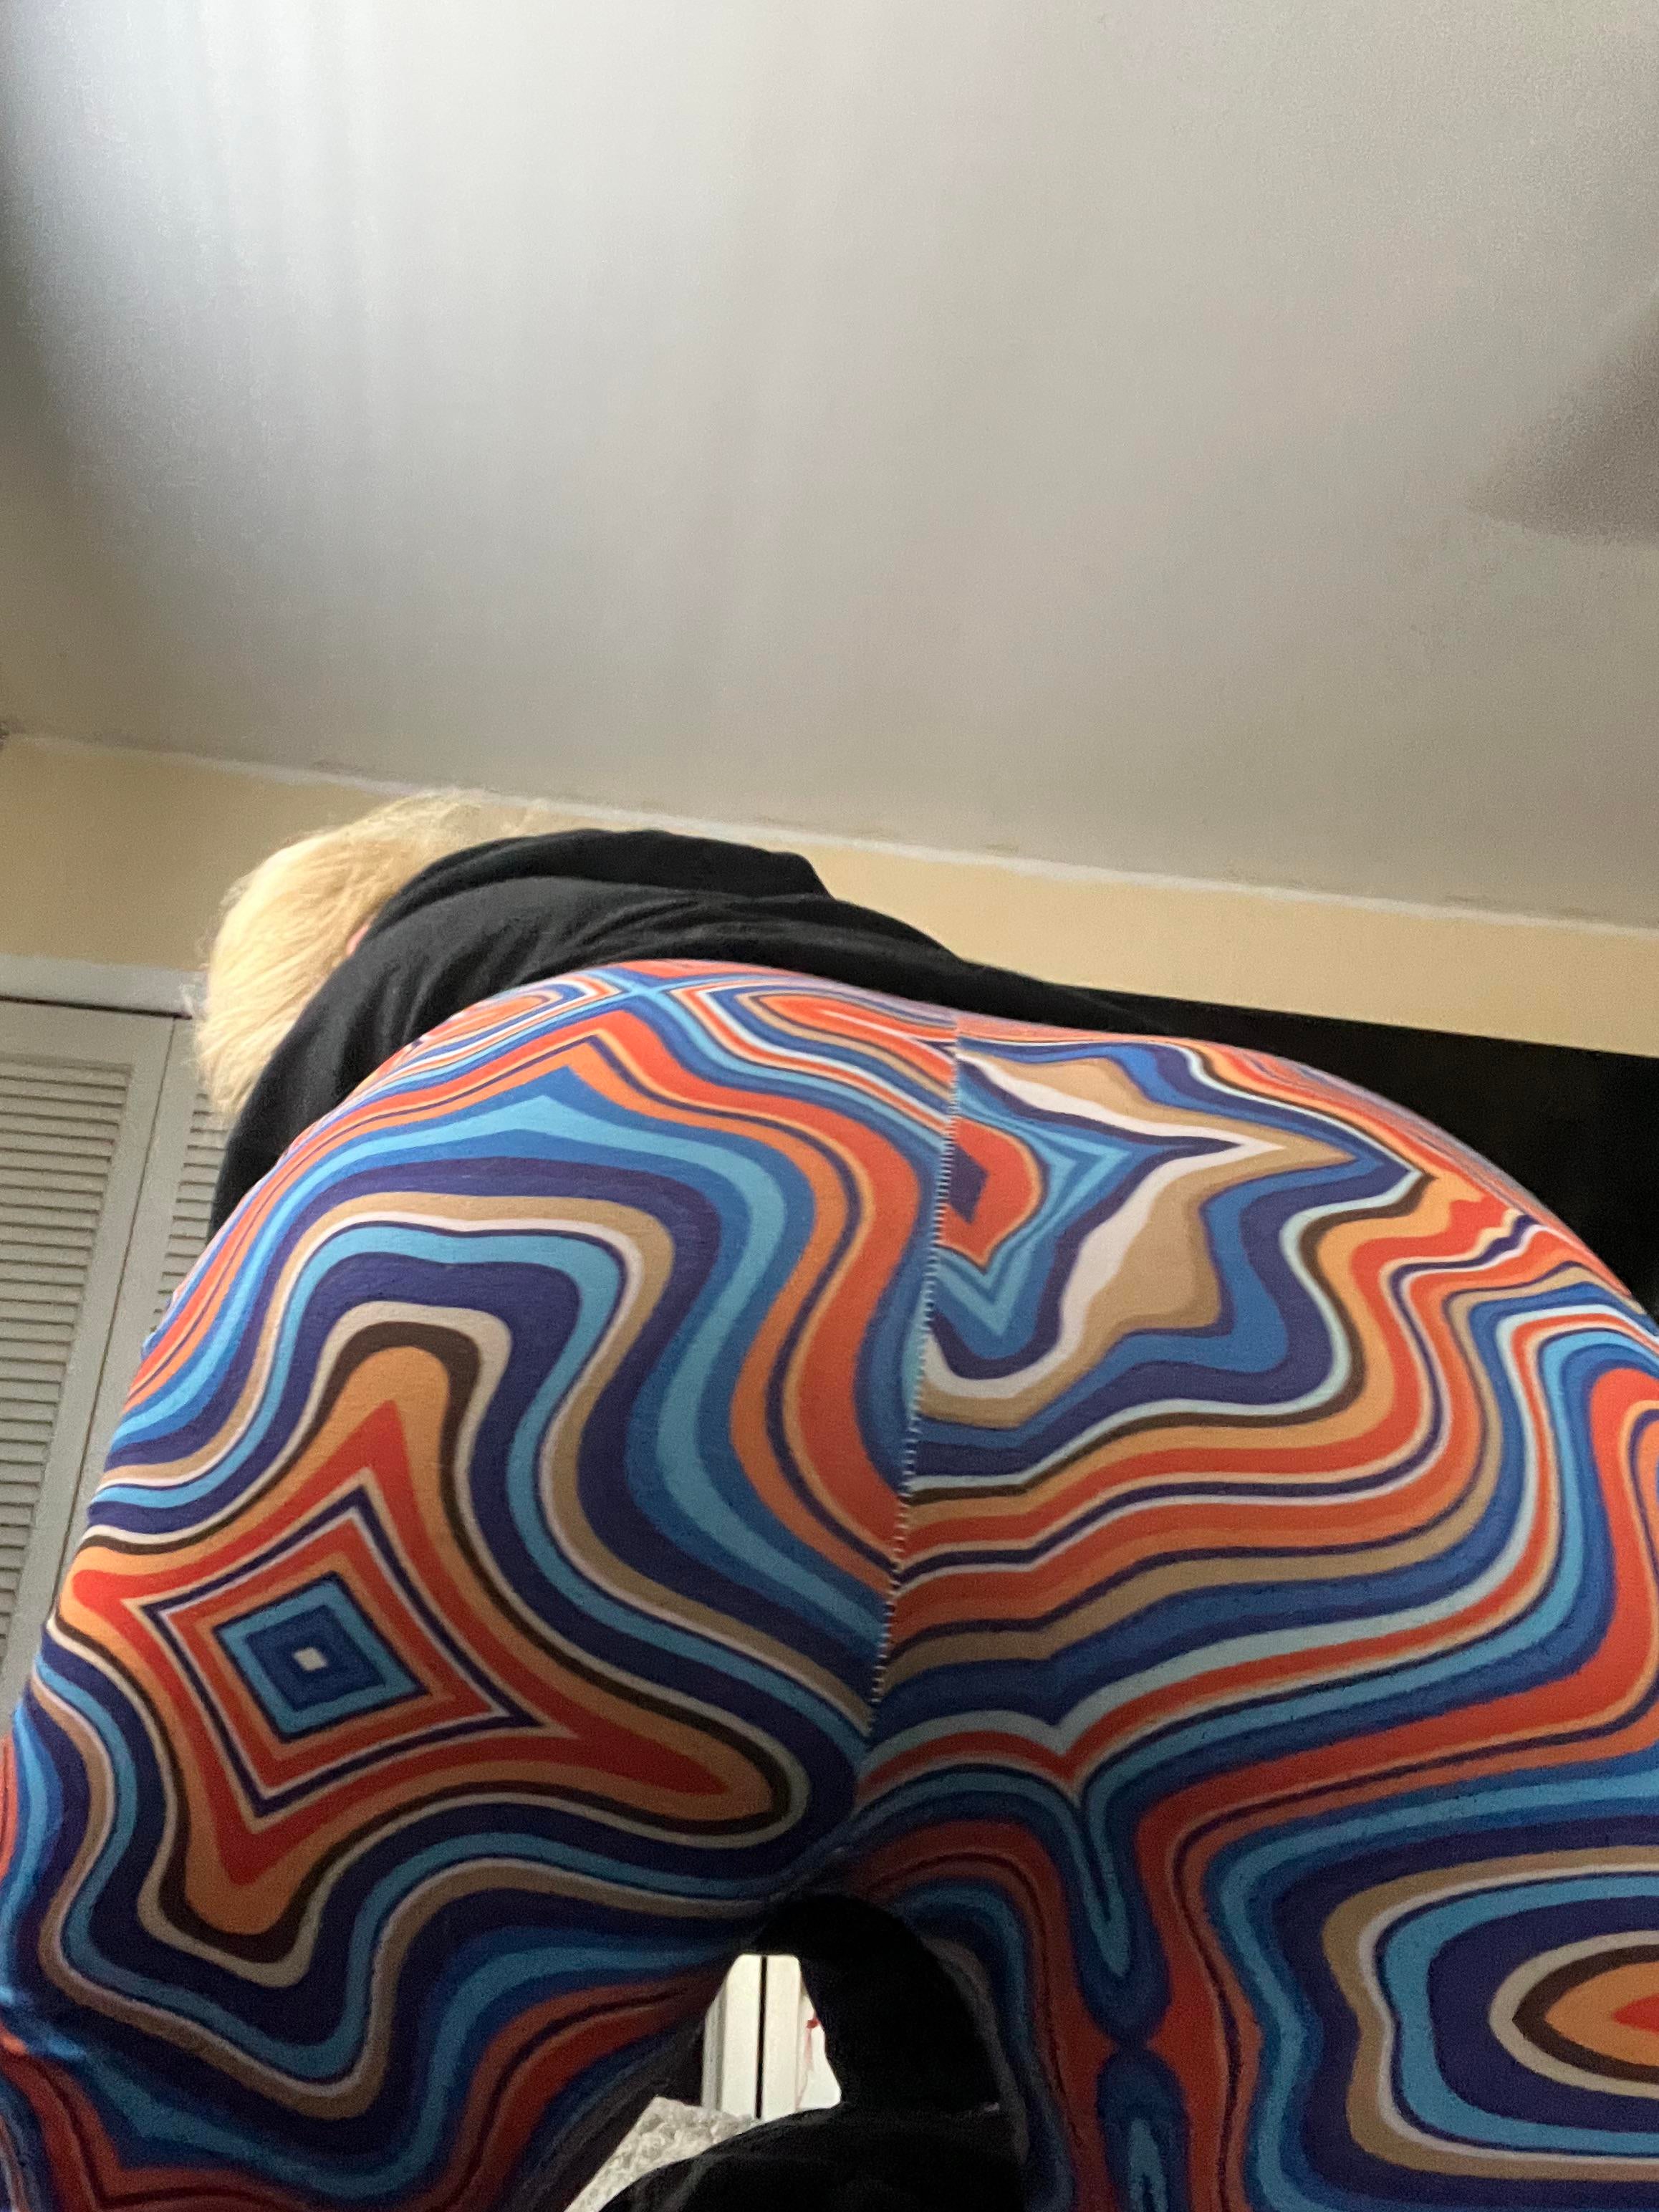 PAWG these pants make my ass look phat